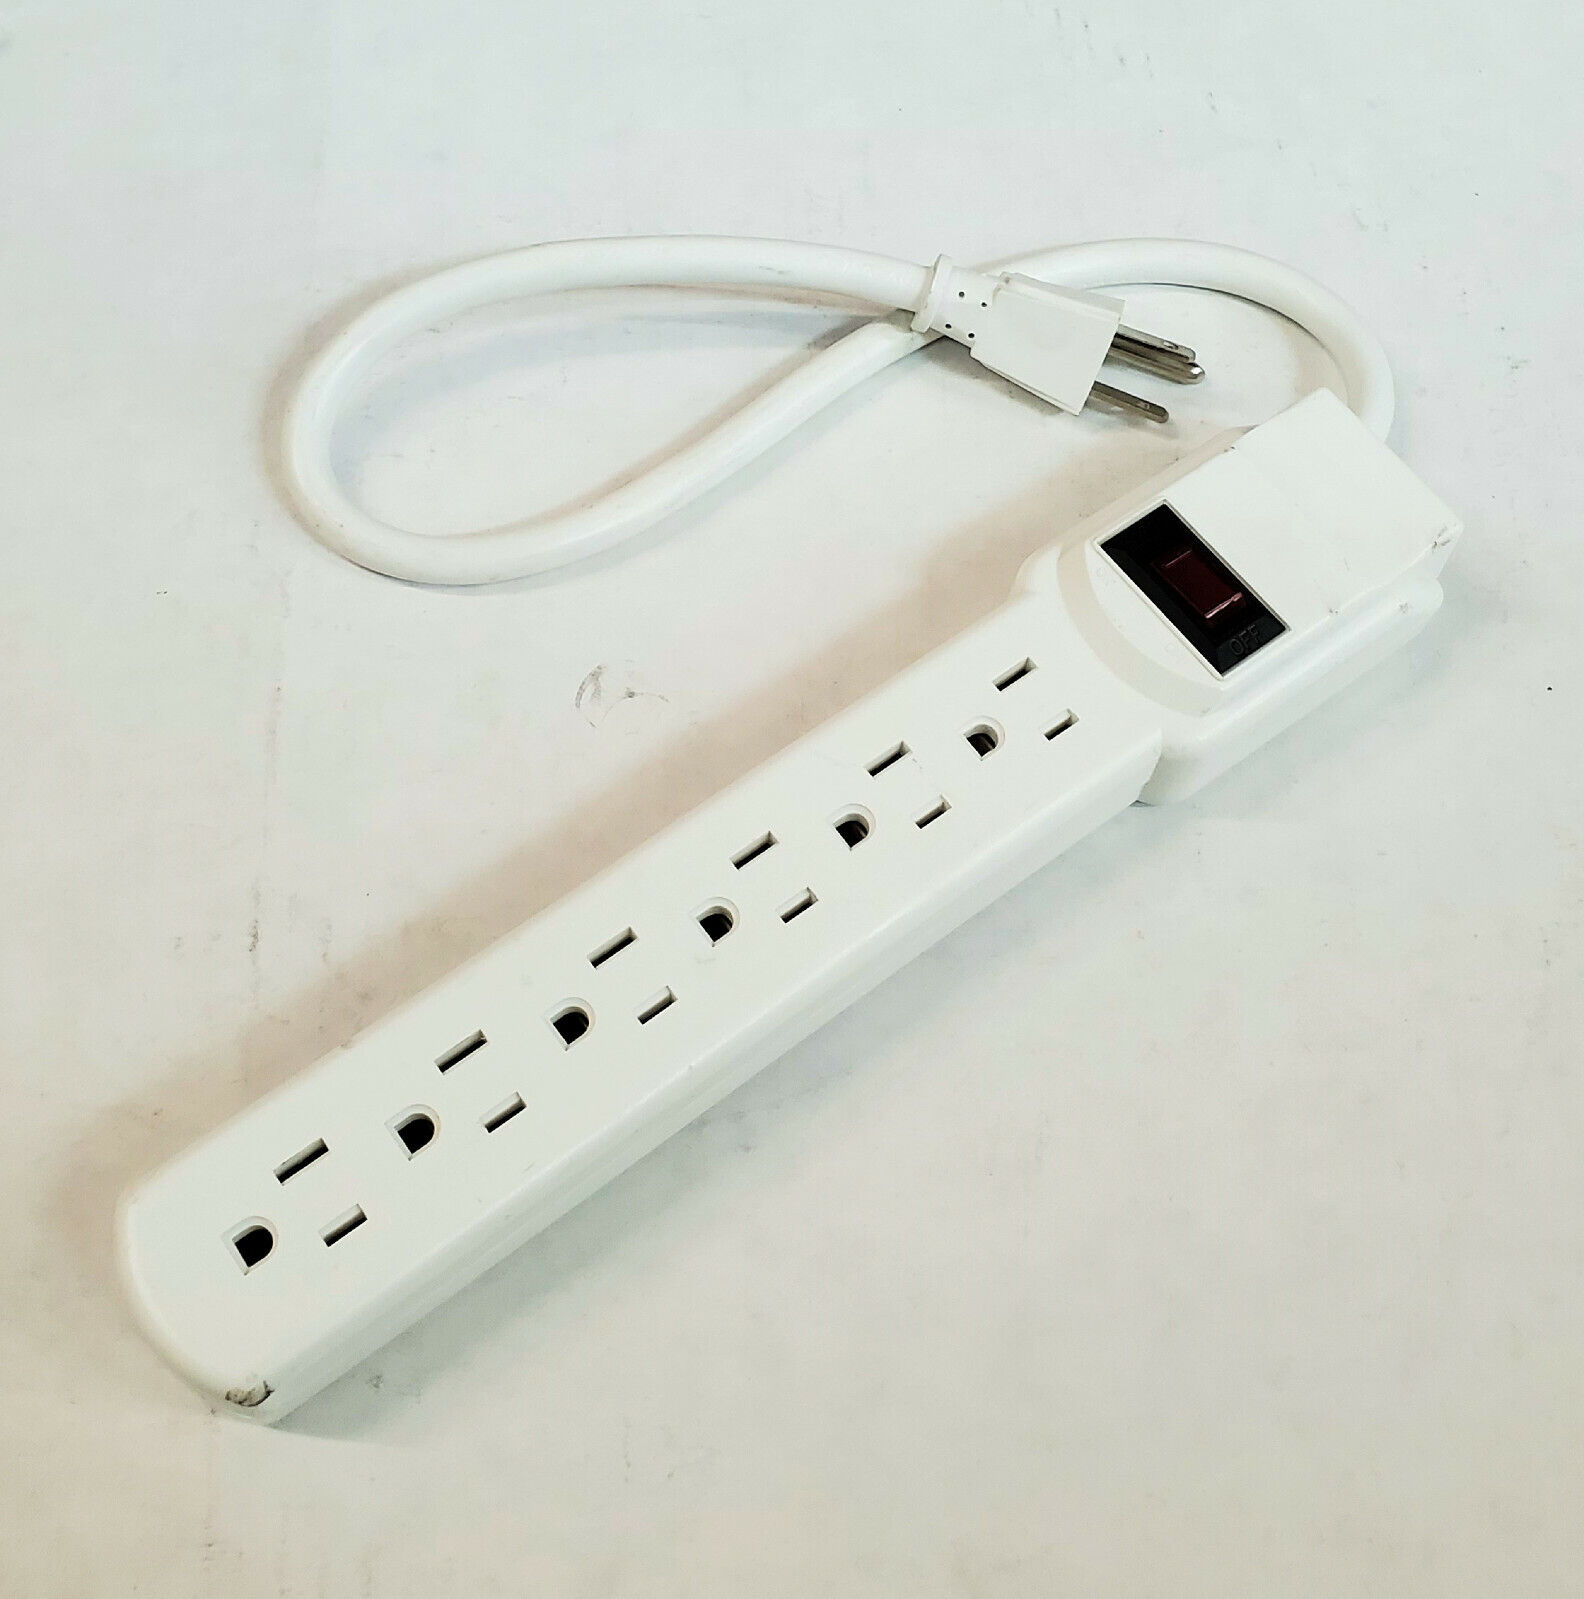 ( 2 Pack ) 1.5 Feet 6 Outlet Heavy Duty Power Strip 14AWG/3 15A, 90J